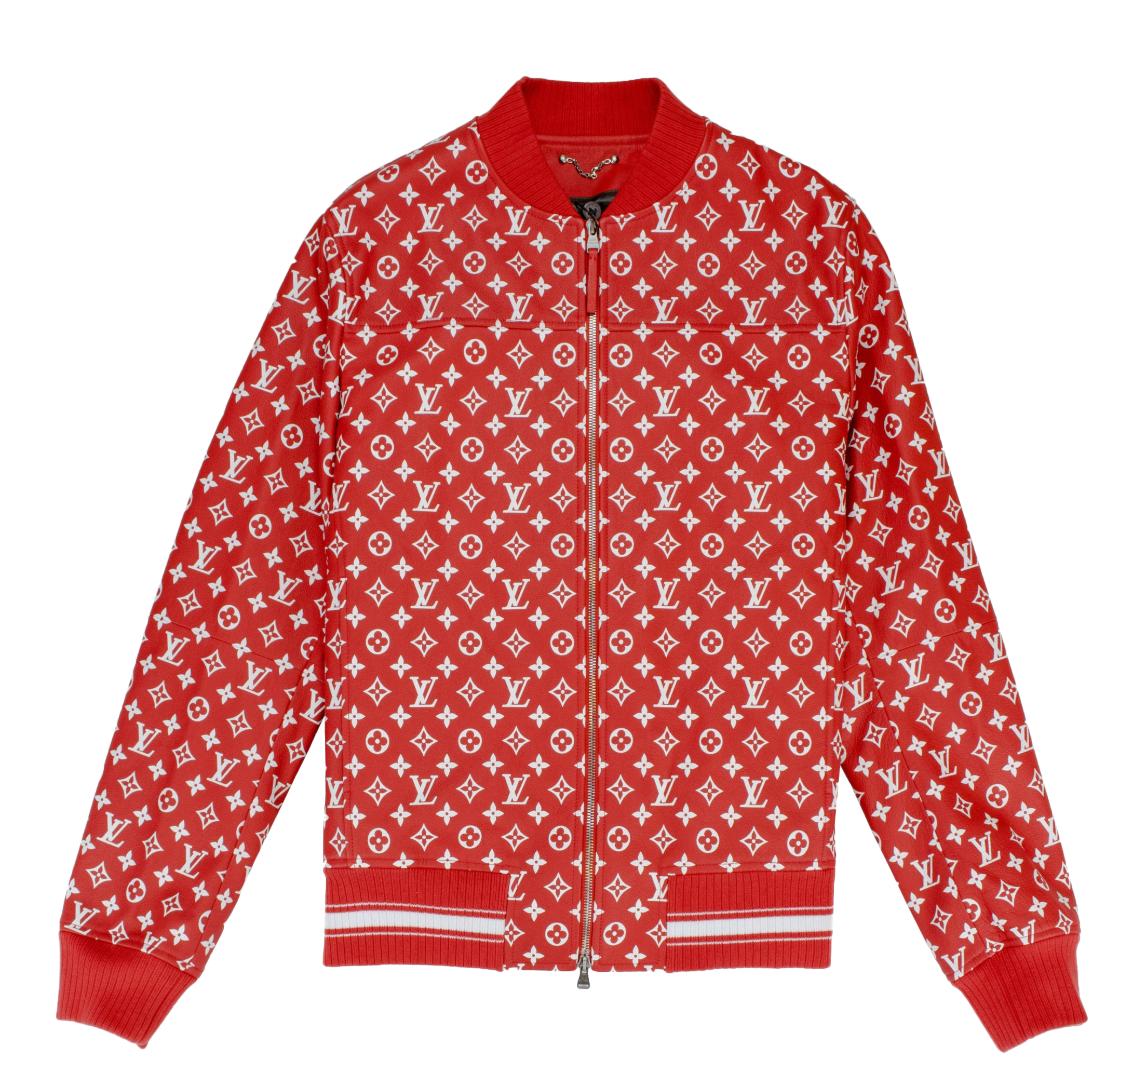 Supreme X Louis Vuitton Leather Baseball Jacket Red in Red for Men - Lyst